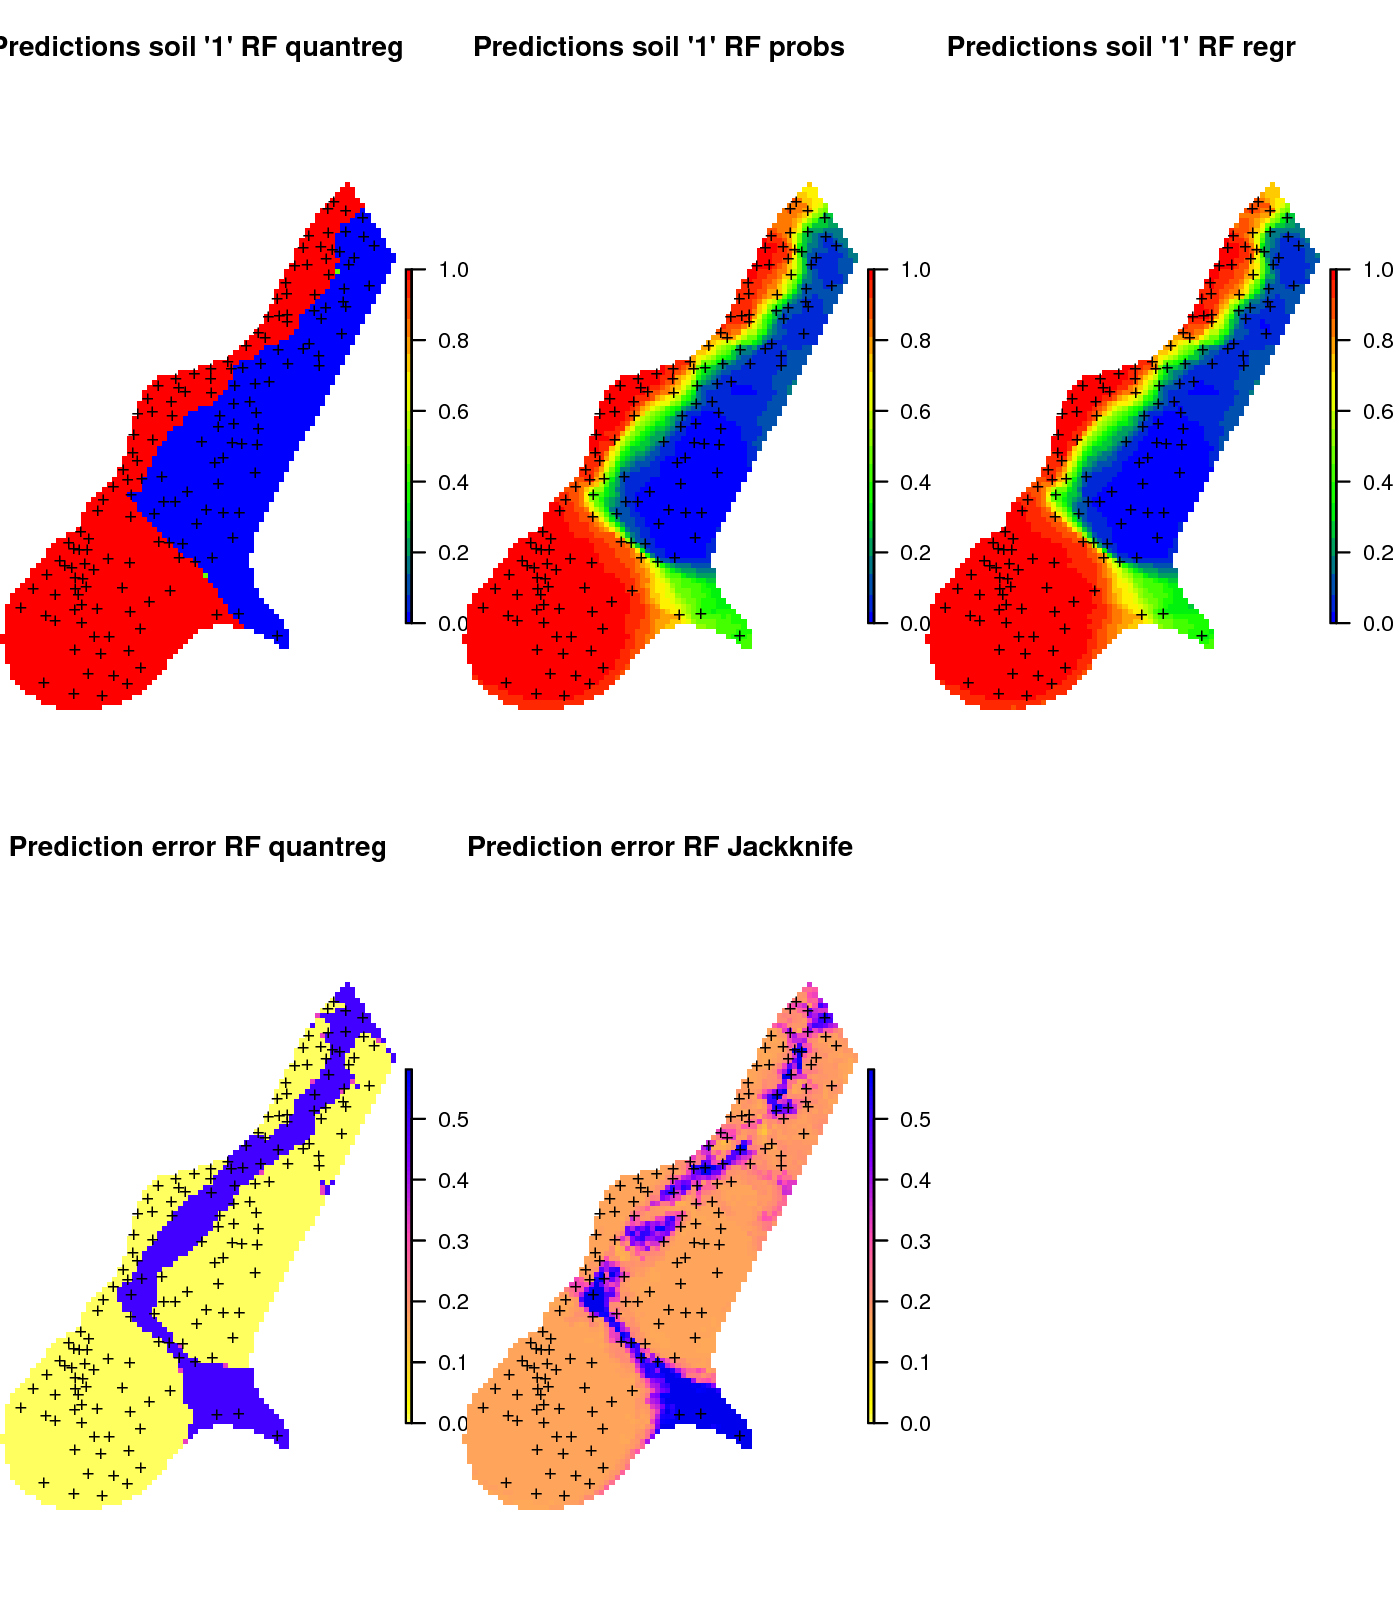 Comparison of predictions for soil class “1” produced using (left) regression and prediction of the median value, (middle) regression and prediction of response value, and (right) classification with probabilities.